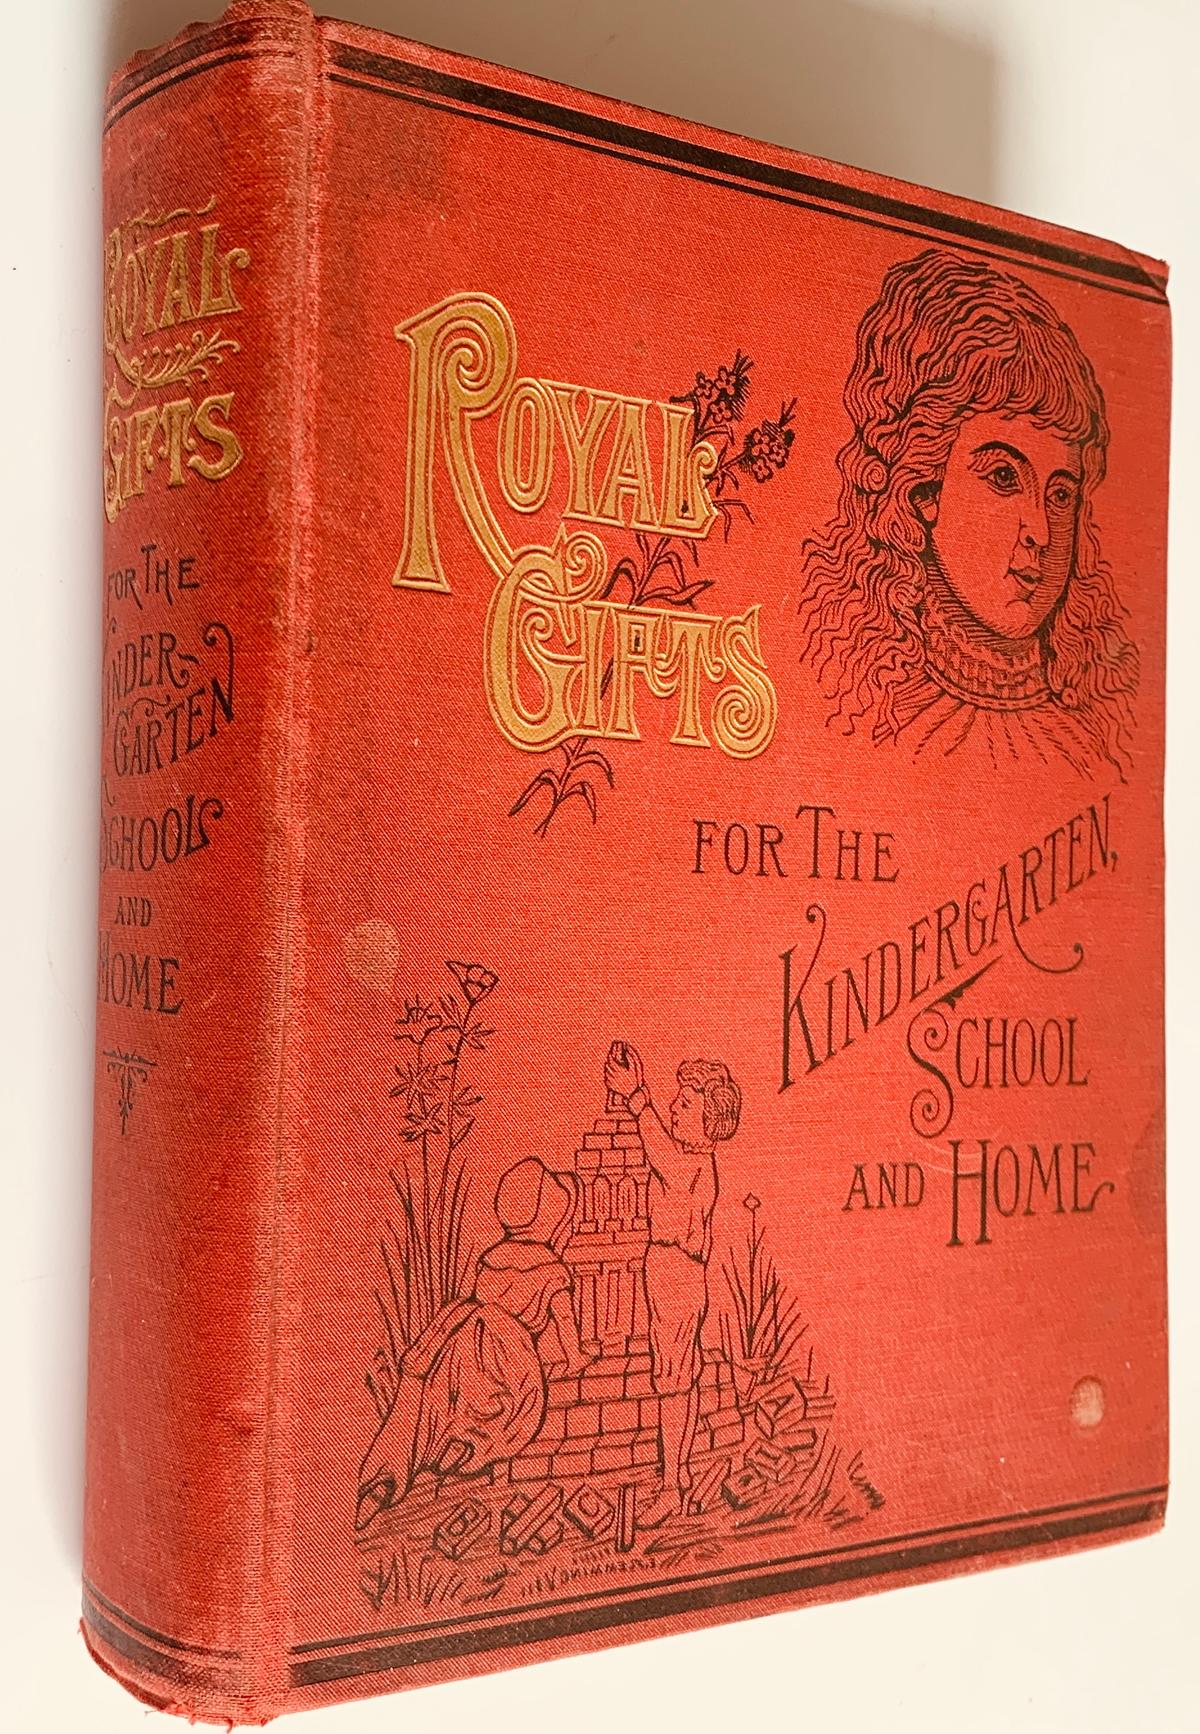 Royal Gifts for the KINDERGARTEN (1888) Illustrated for School & Home